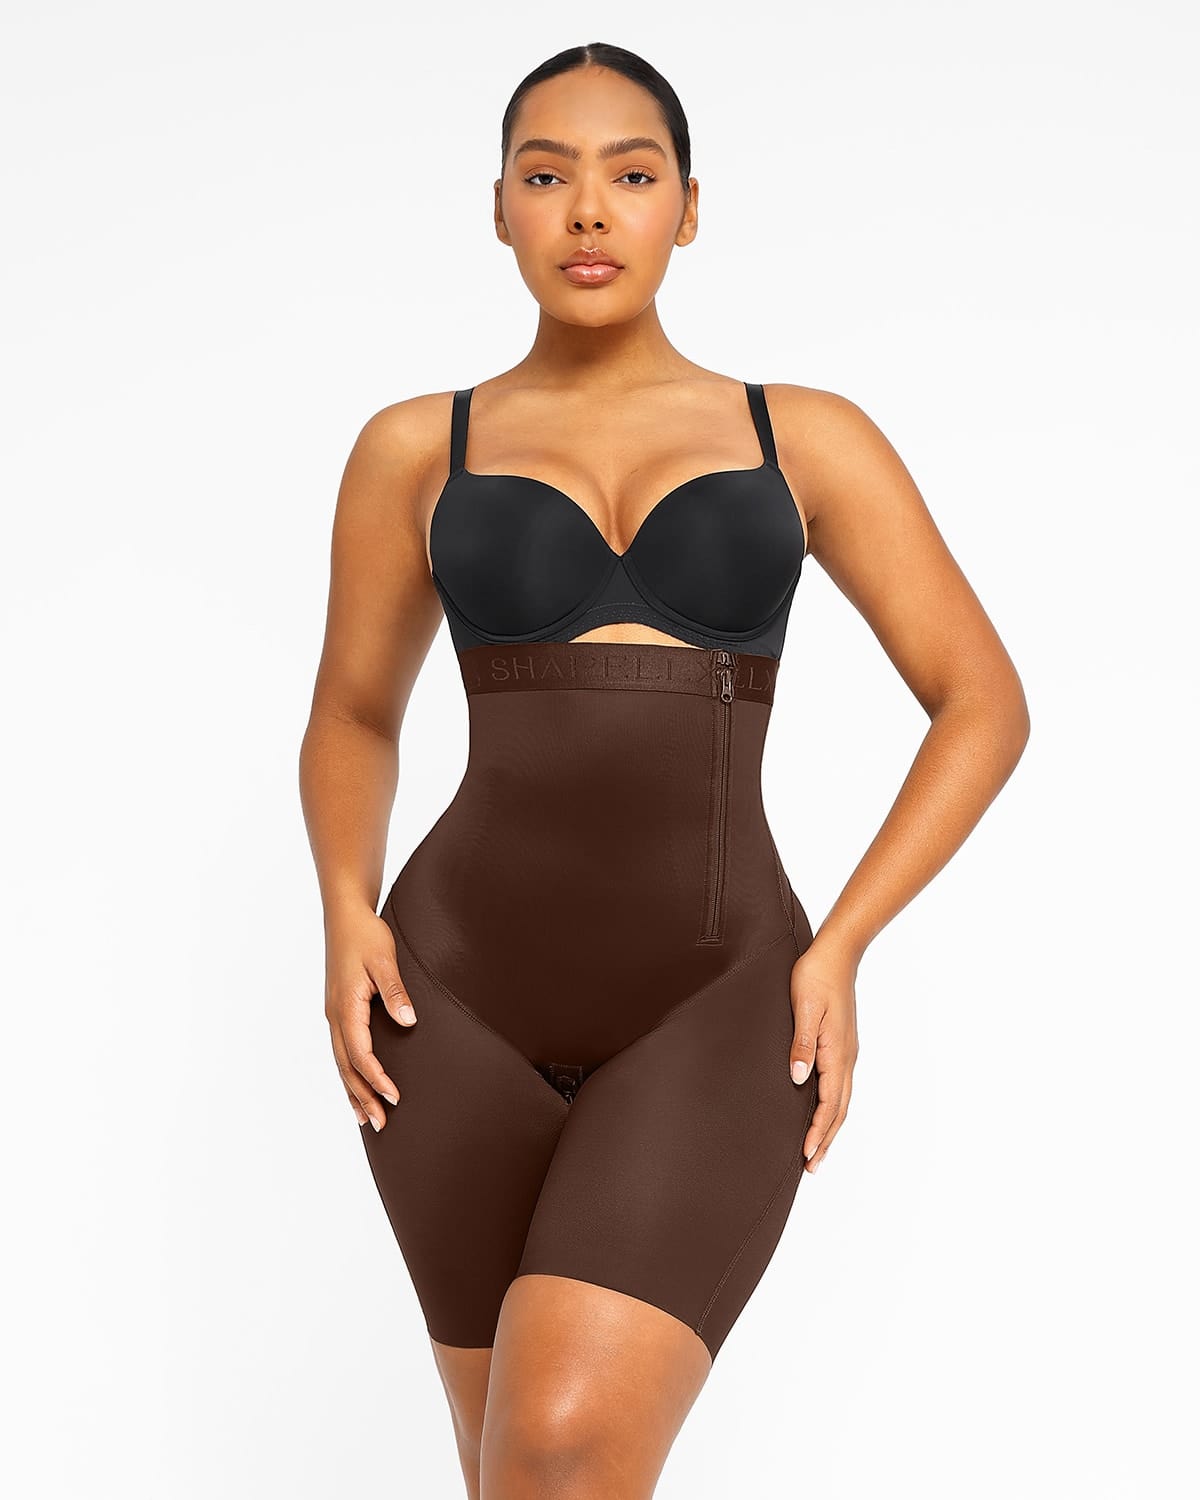 Discover Top Shapellx Shapewear: Slimming Bodysuit, Dress & More